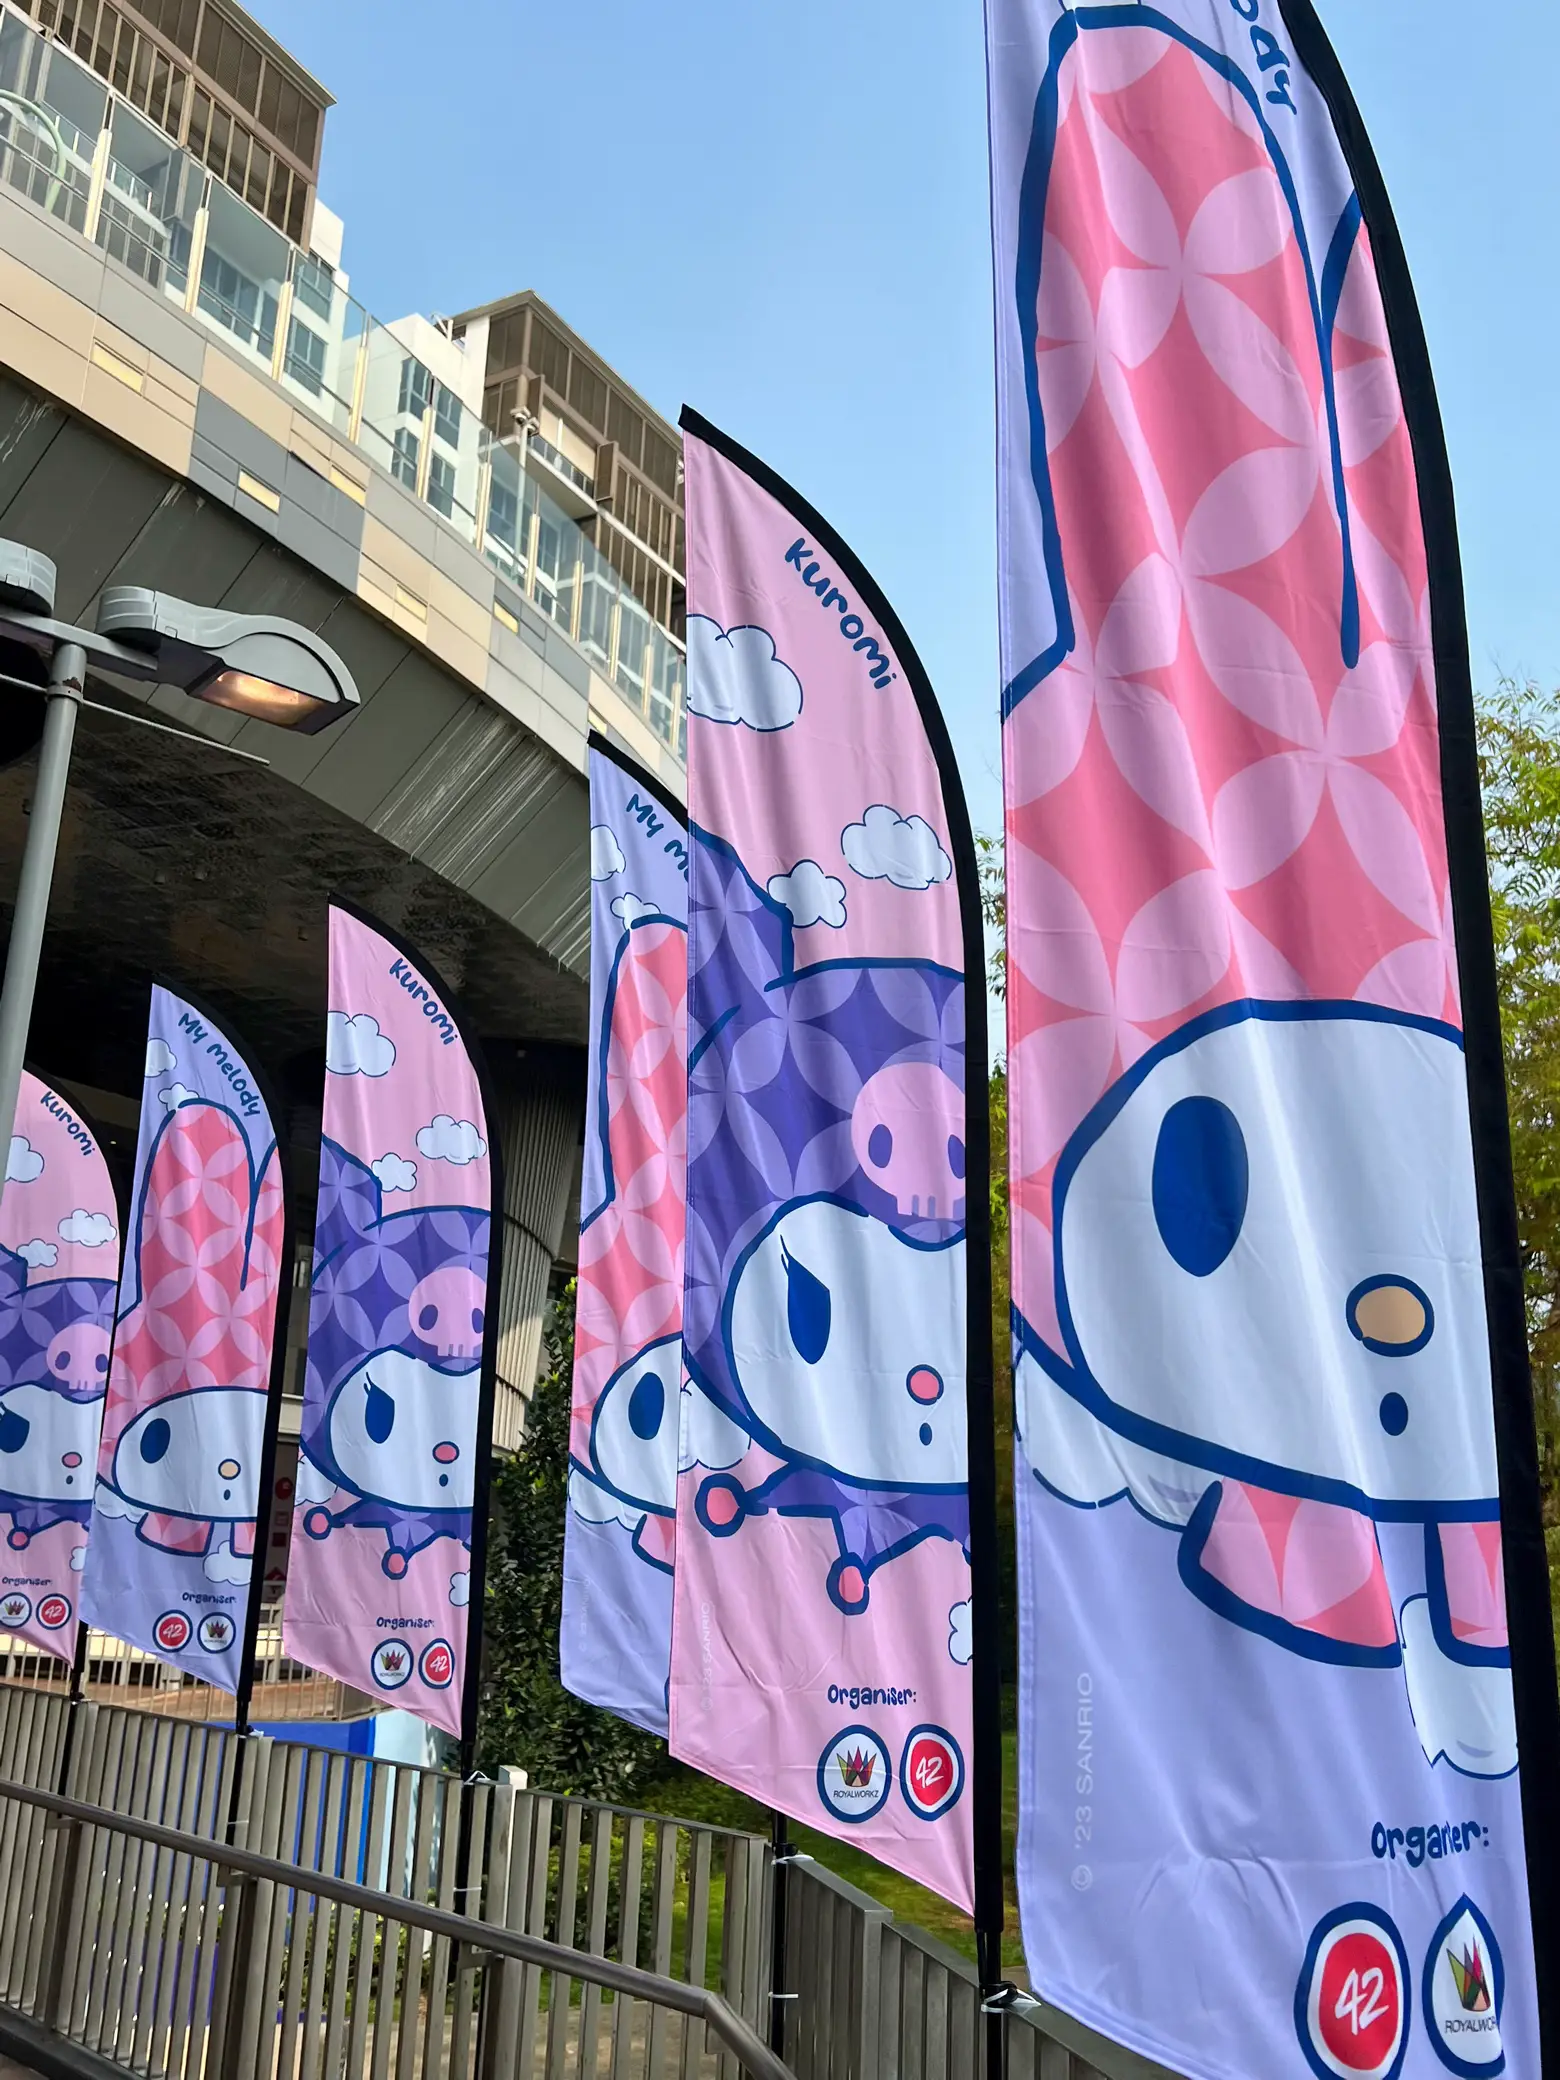 My Melody & Kuromi Spring Party Admission in Singapore - Klook Singapore